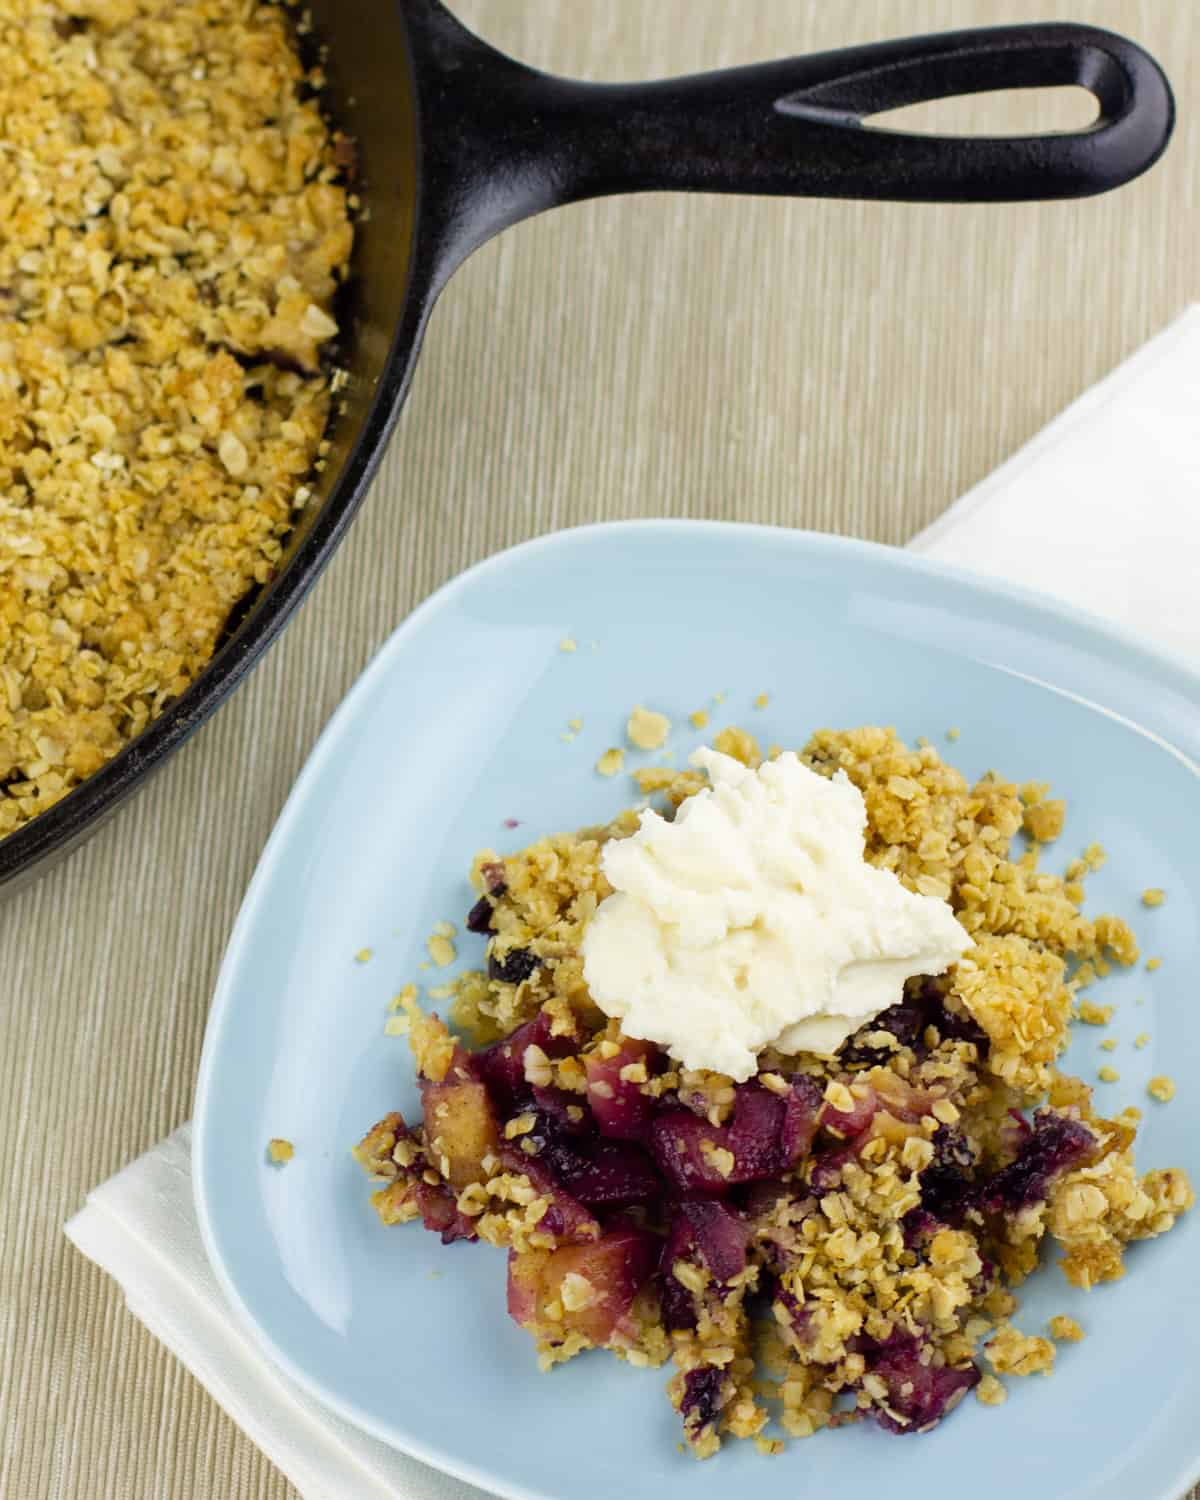 A plate and skillet of apple blueberry crumble.